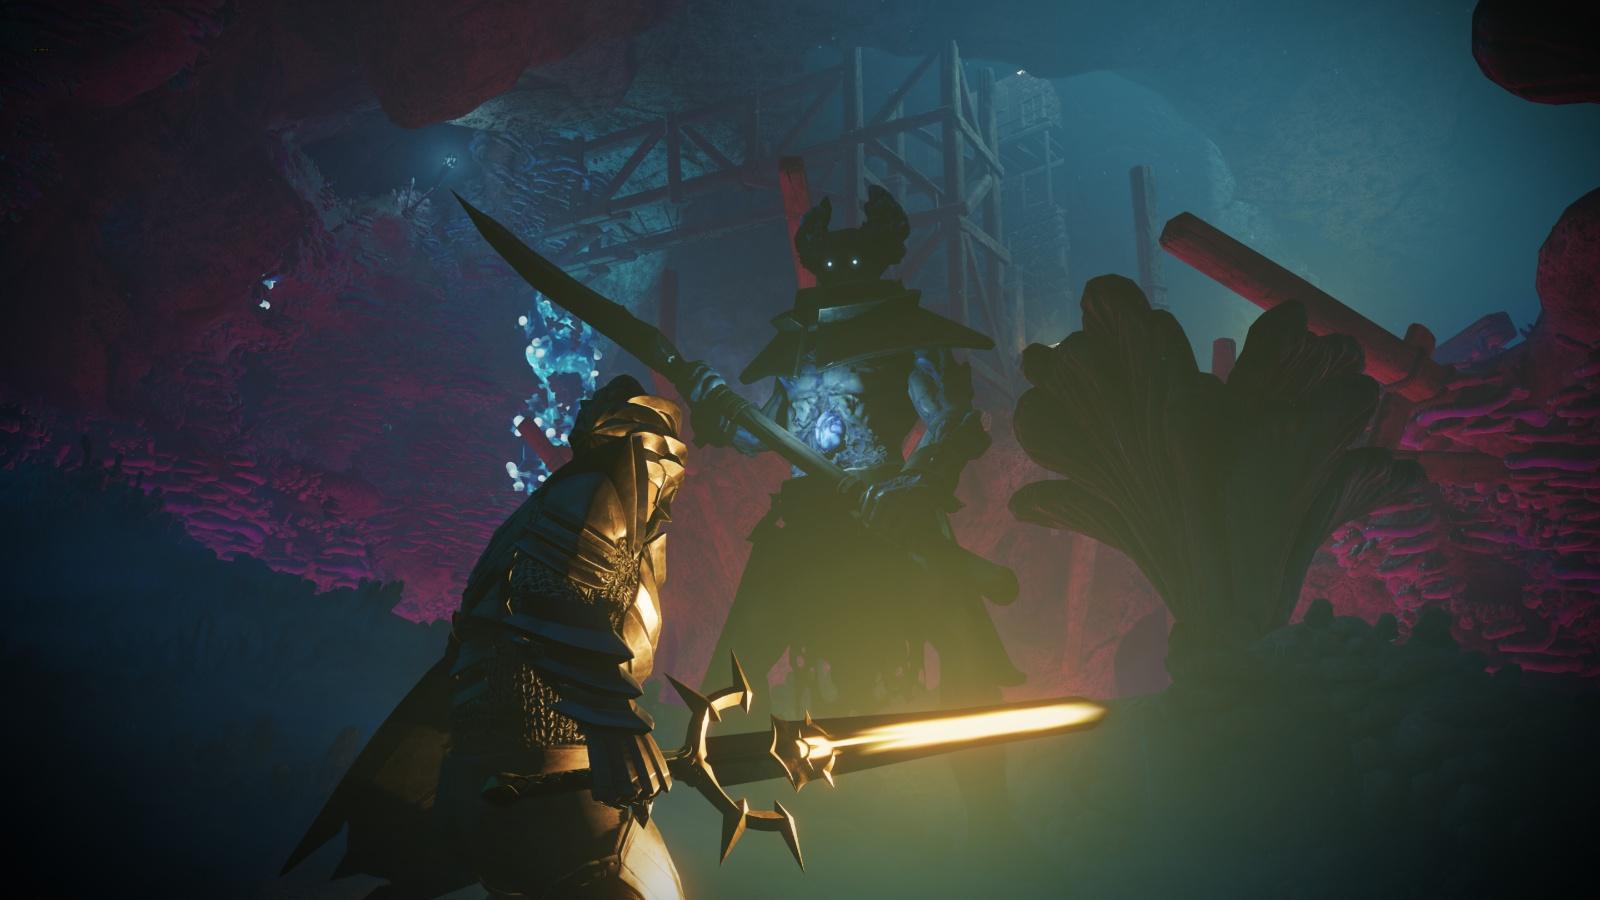 A screenshot from the game Enshrouded